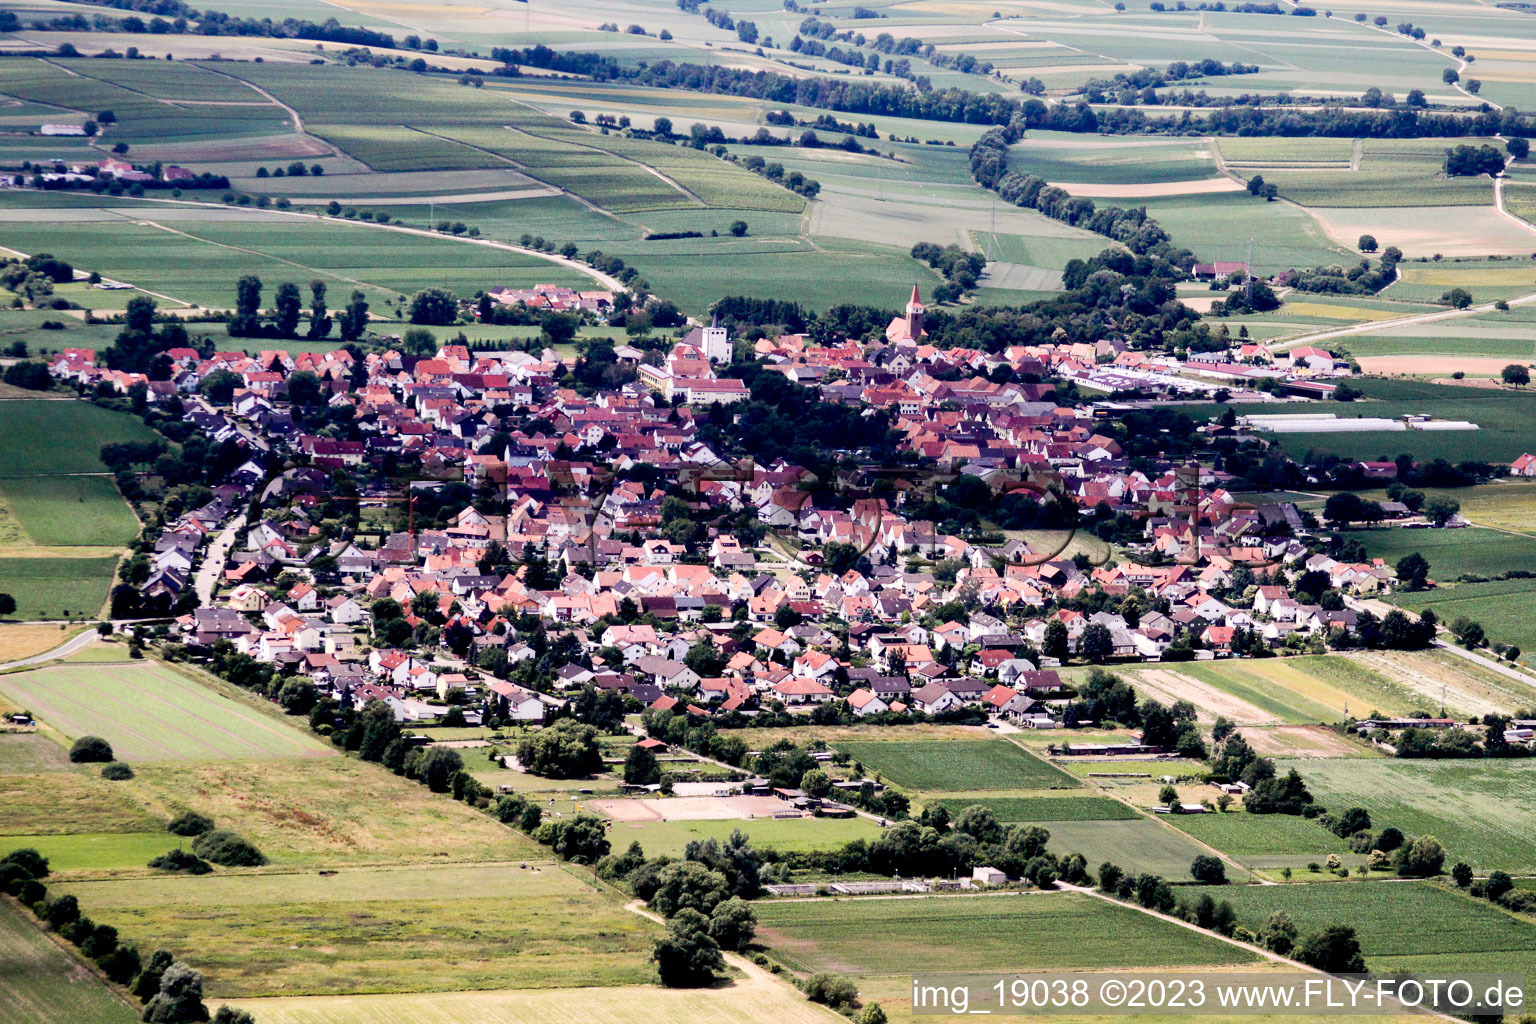 Drone image of Minfeld in the state Rhineland-Palatinate, Germany